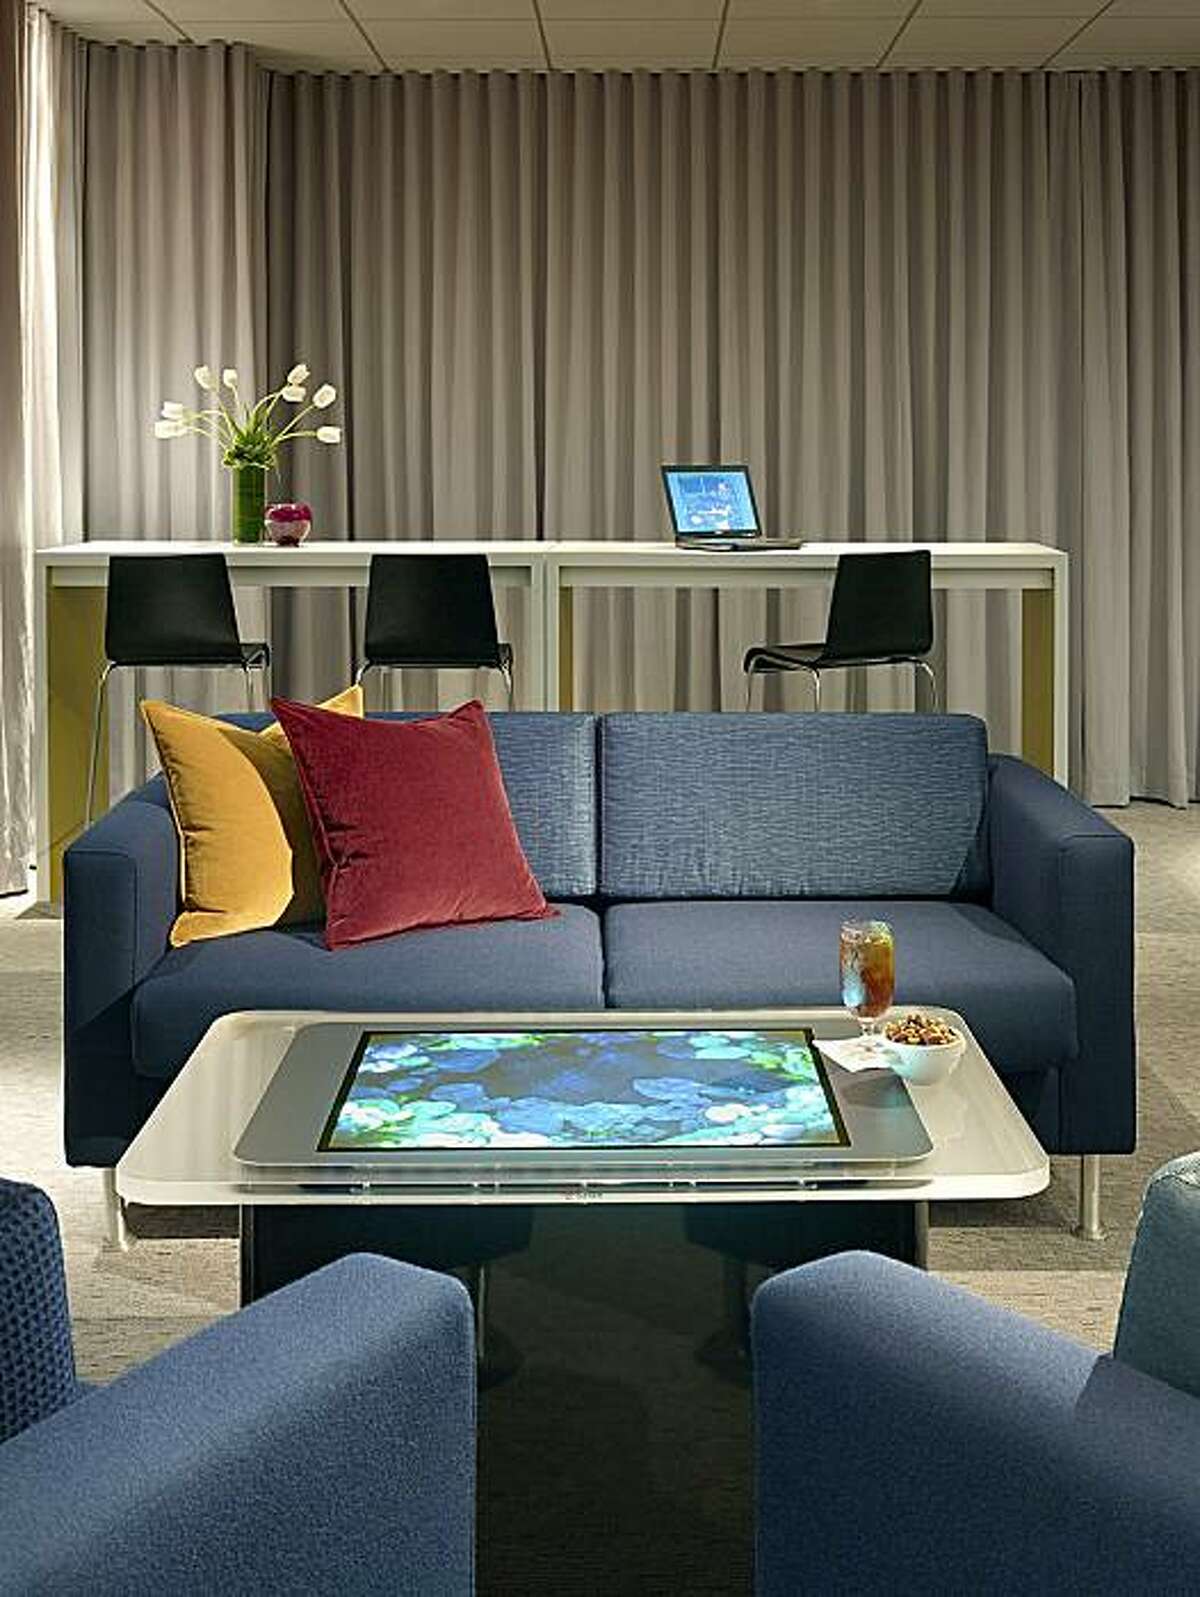 The Microsoft Surface coffee table at the Fairmont?s new Intersect media lounge is a precursor of interactive furniture to come.